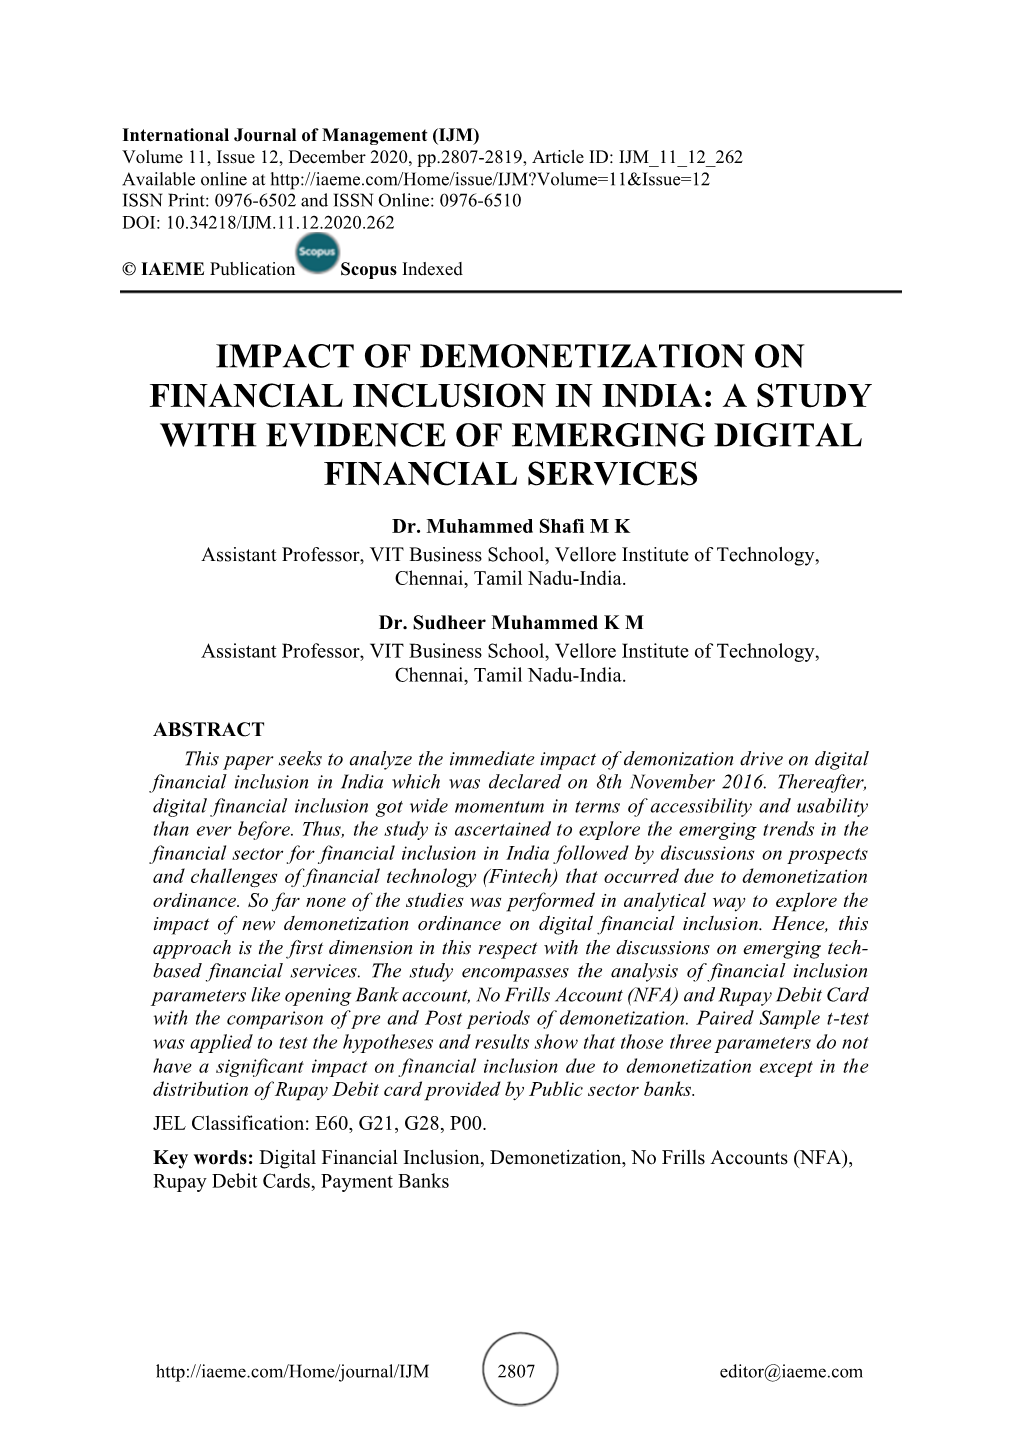 Impact of Demonetization on Financial Inclusion in India: a Study with Evidence of Emerging Digital Financial Services